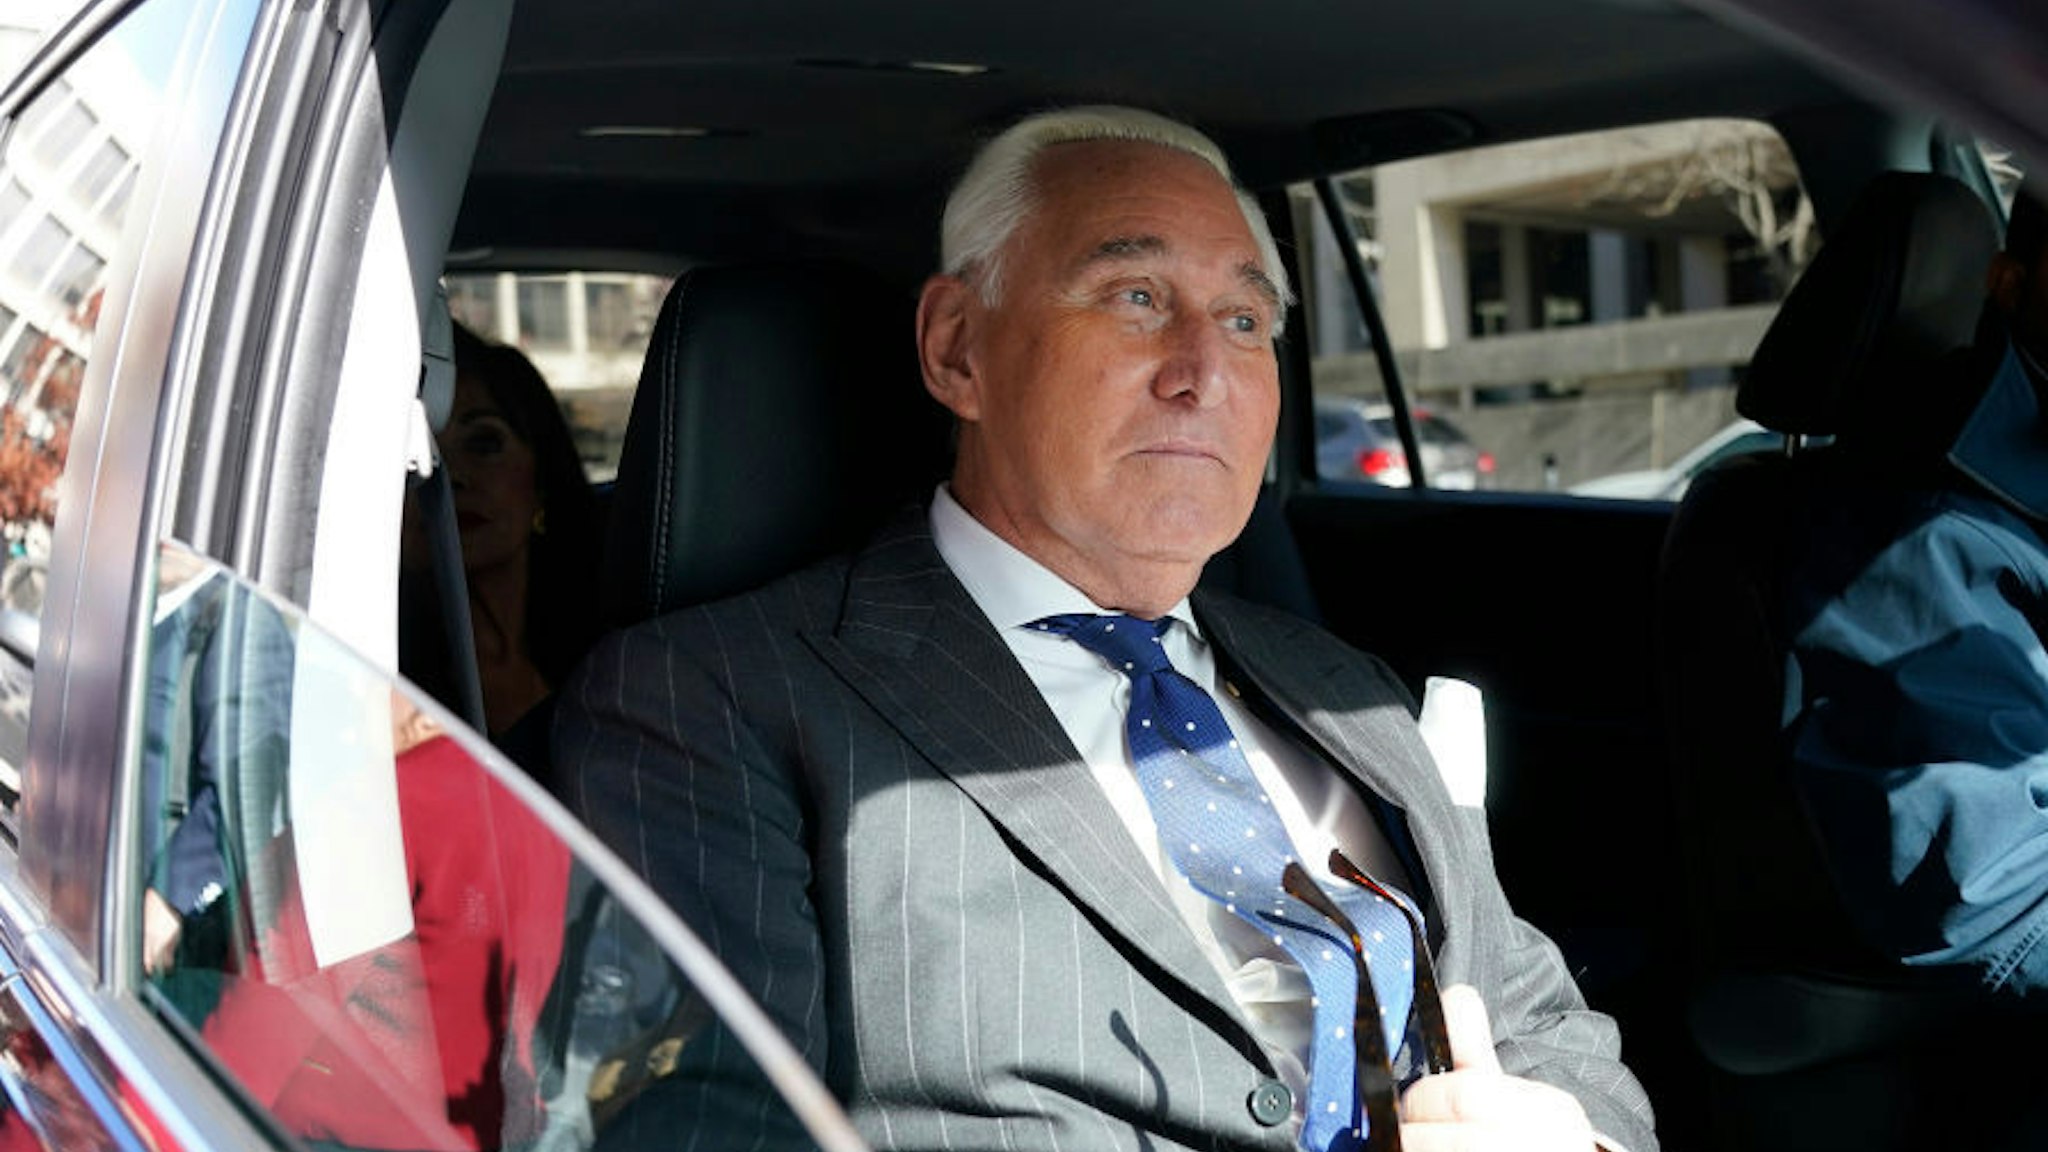 Former advisor to U.S. President Donald Trump, Roger Stone, departs the E. Barrett Prettyman United States Courthouse after being found guilty of obstructing a congressional investigation into Russia‚Äôs interference in the 2016 election on November 15, 2019 in Washington, DC. Stone faced seven felony charges and was found guilty on all counts. (Photo by Win McNamee/Getty Images)